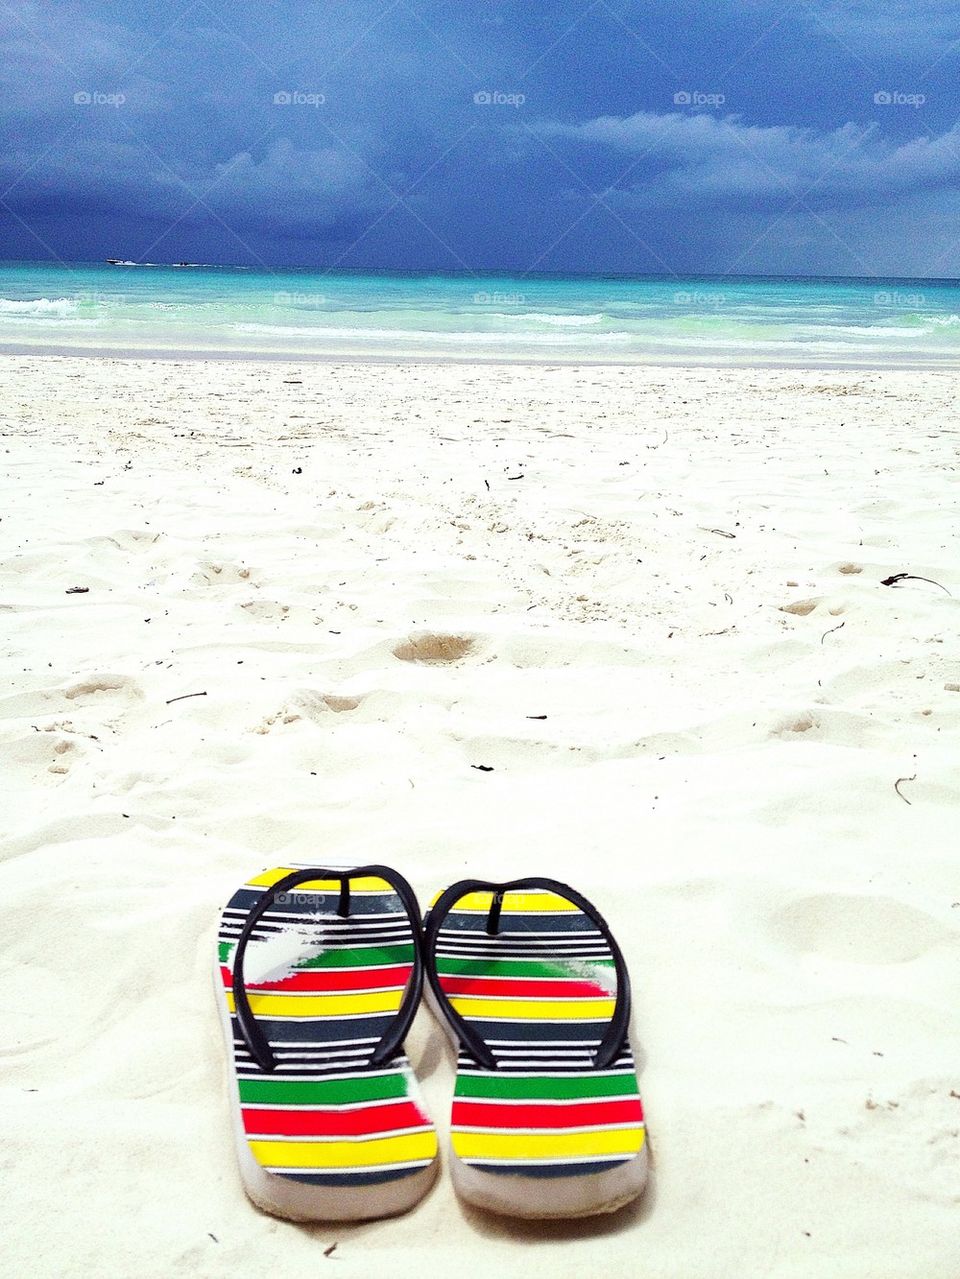 Slippers by the beach